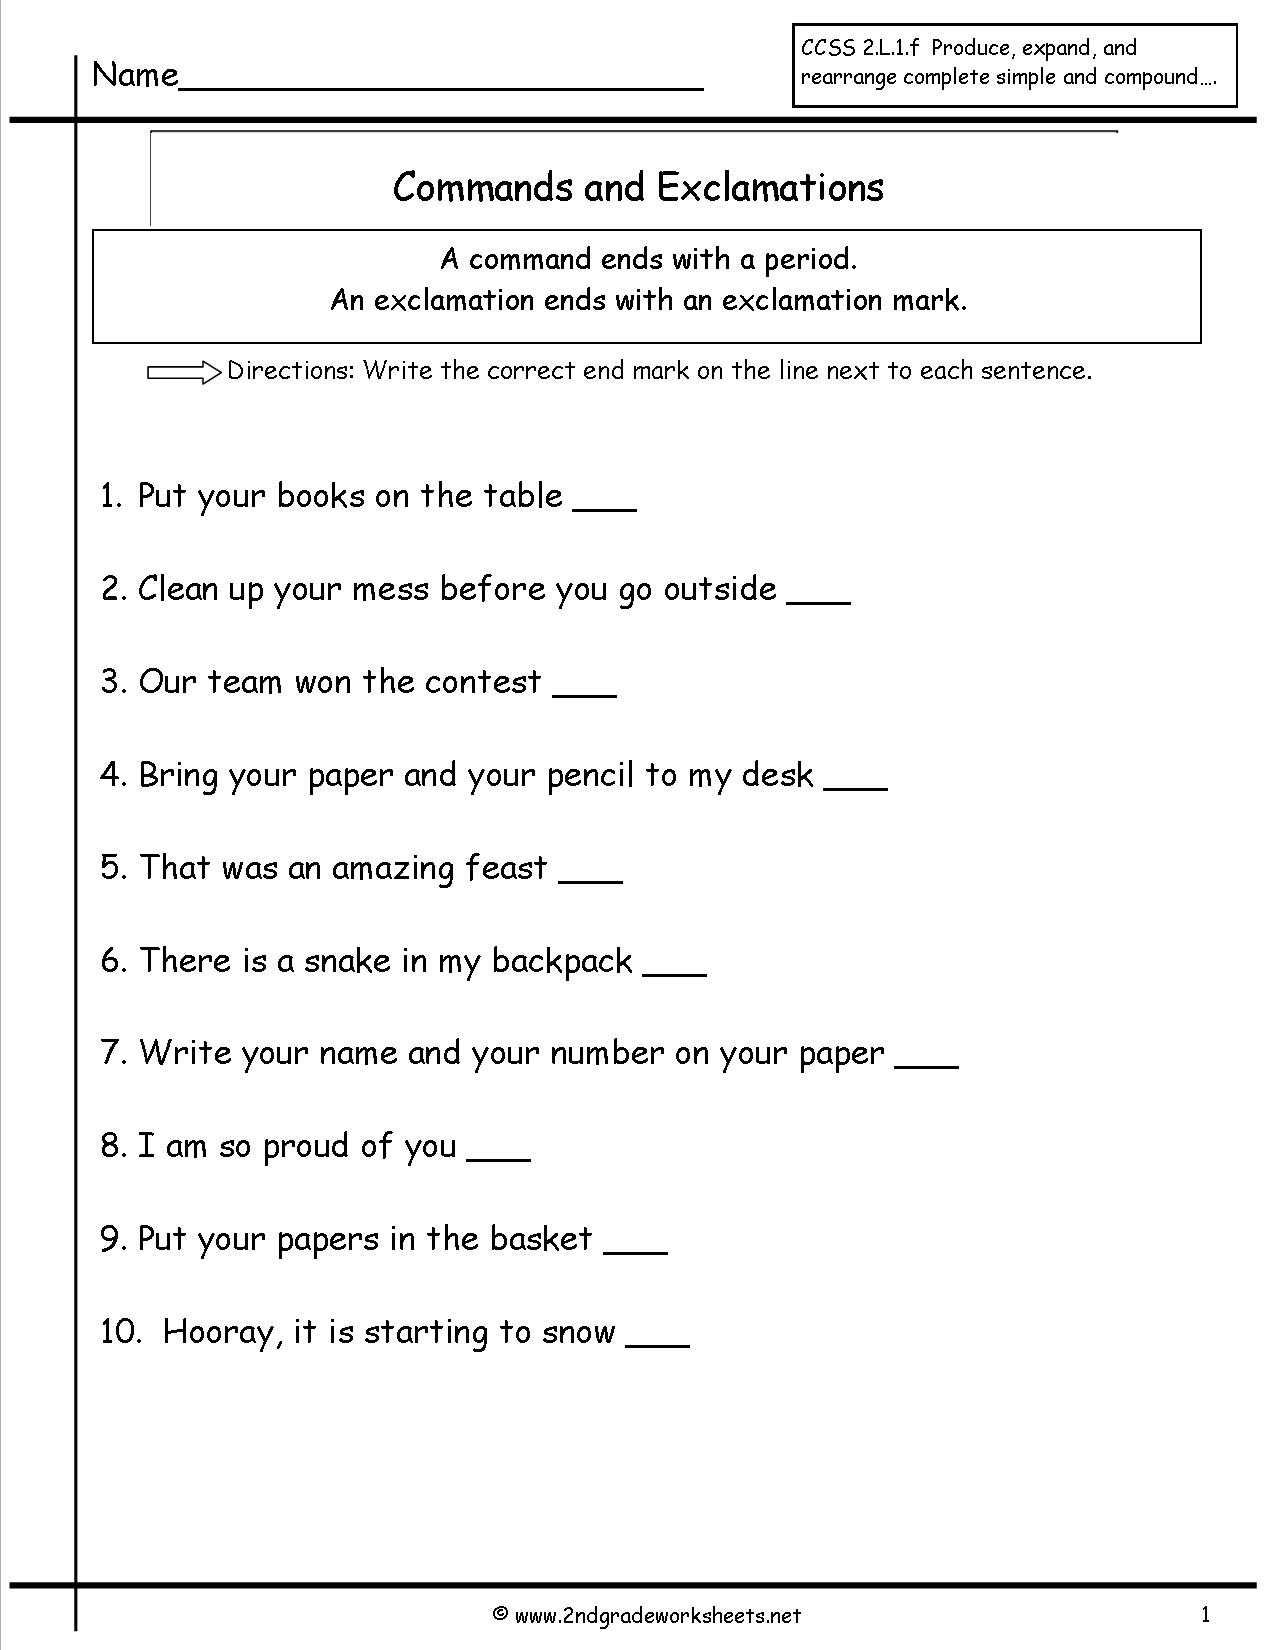 Factoring by Grouping Worksheet together with Mands and Exclamation Worksheets the Best Worksheets Image